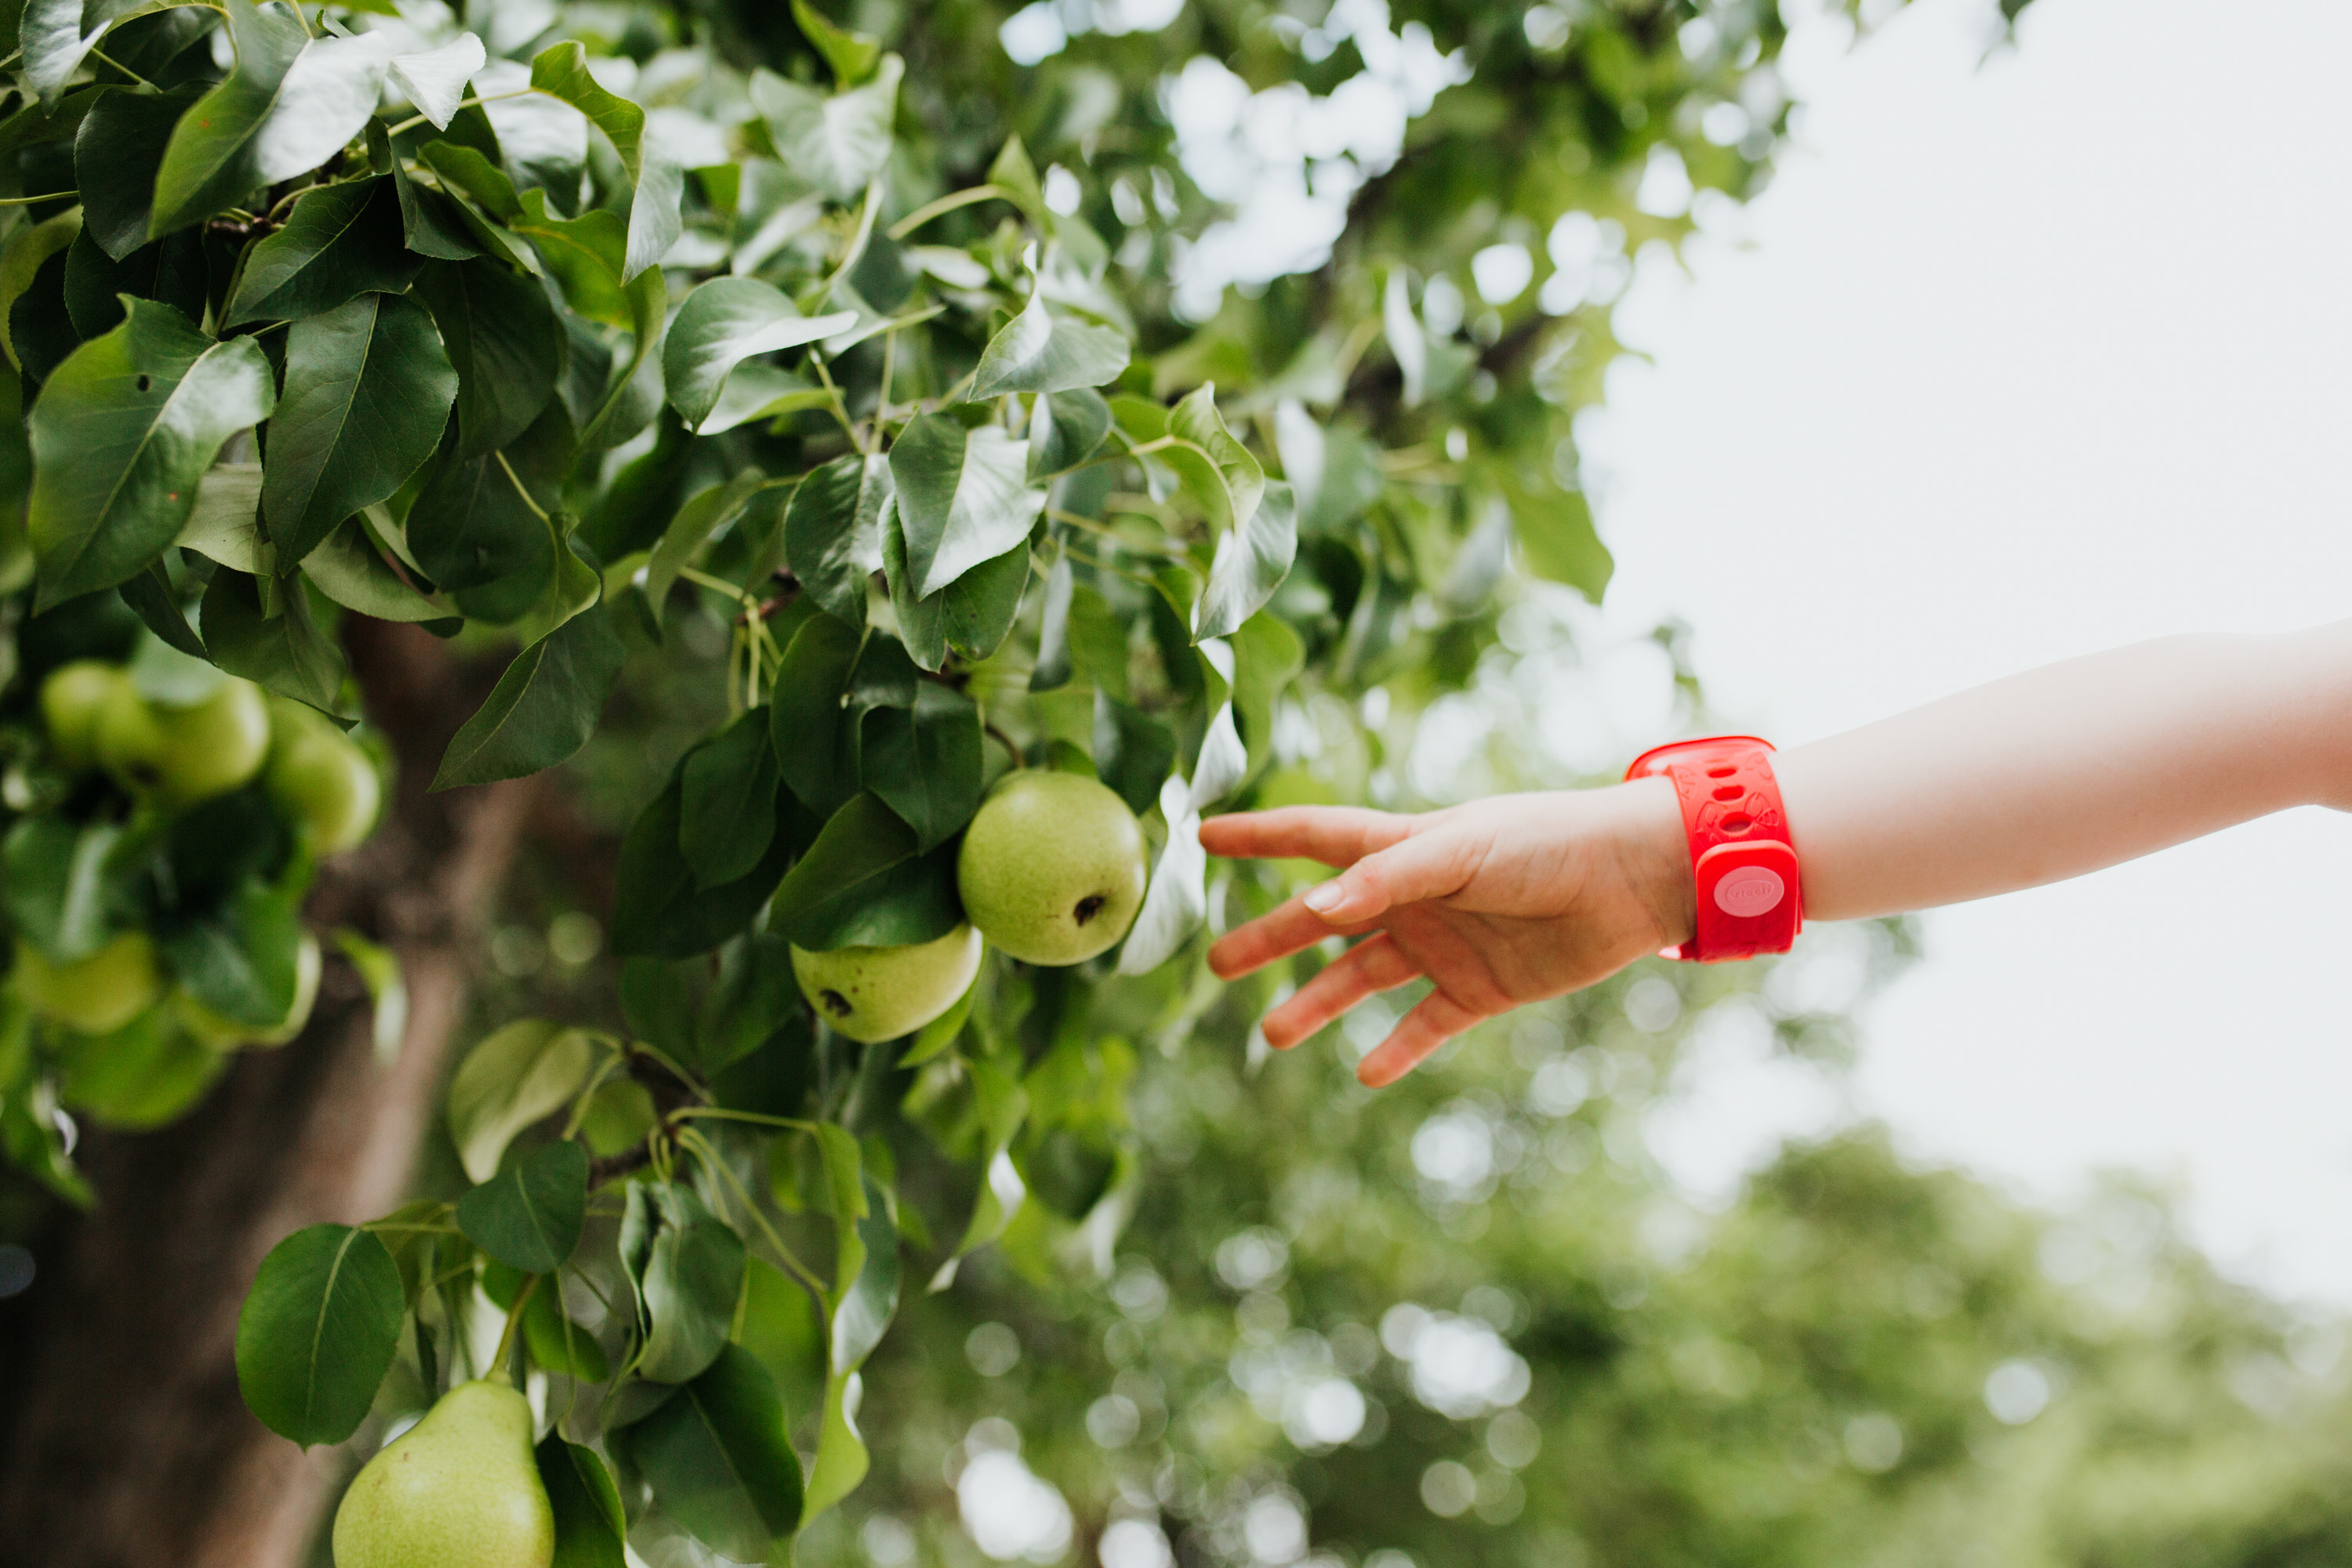 A person reaching for a green apple on a tree